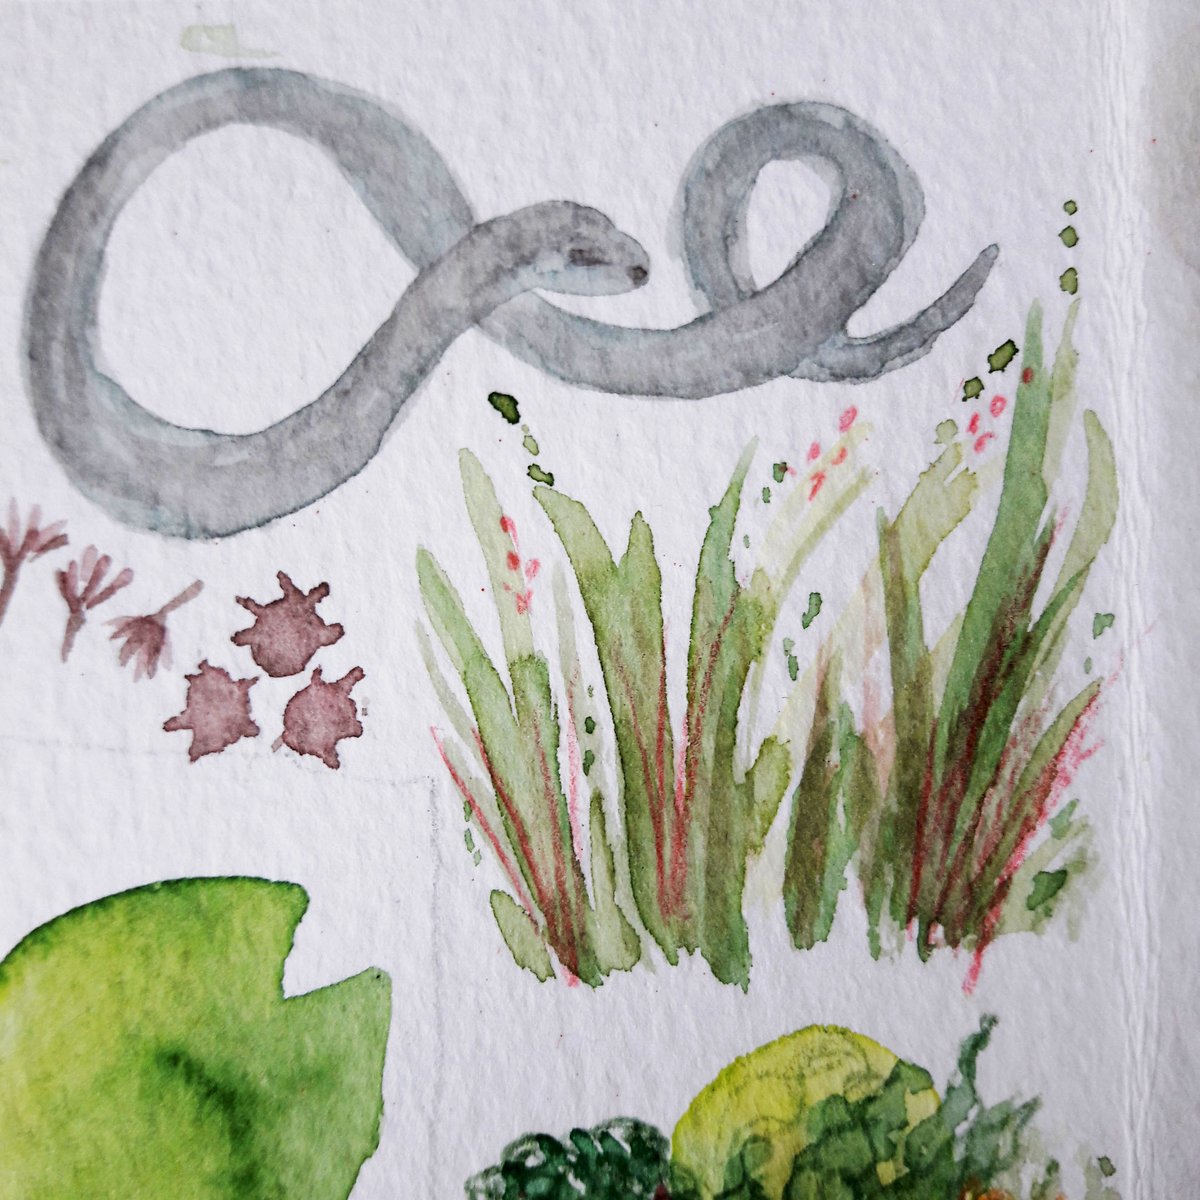 Being in nature and sketching in nature are so supportive to my mental wellbeing. This week I spent time beside a slow worm! 
#Watercolourpainting #greensketching
#MentalHealthAwarenessWeek